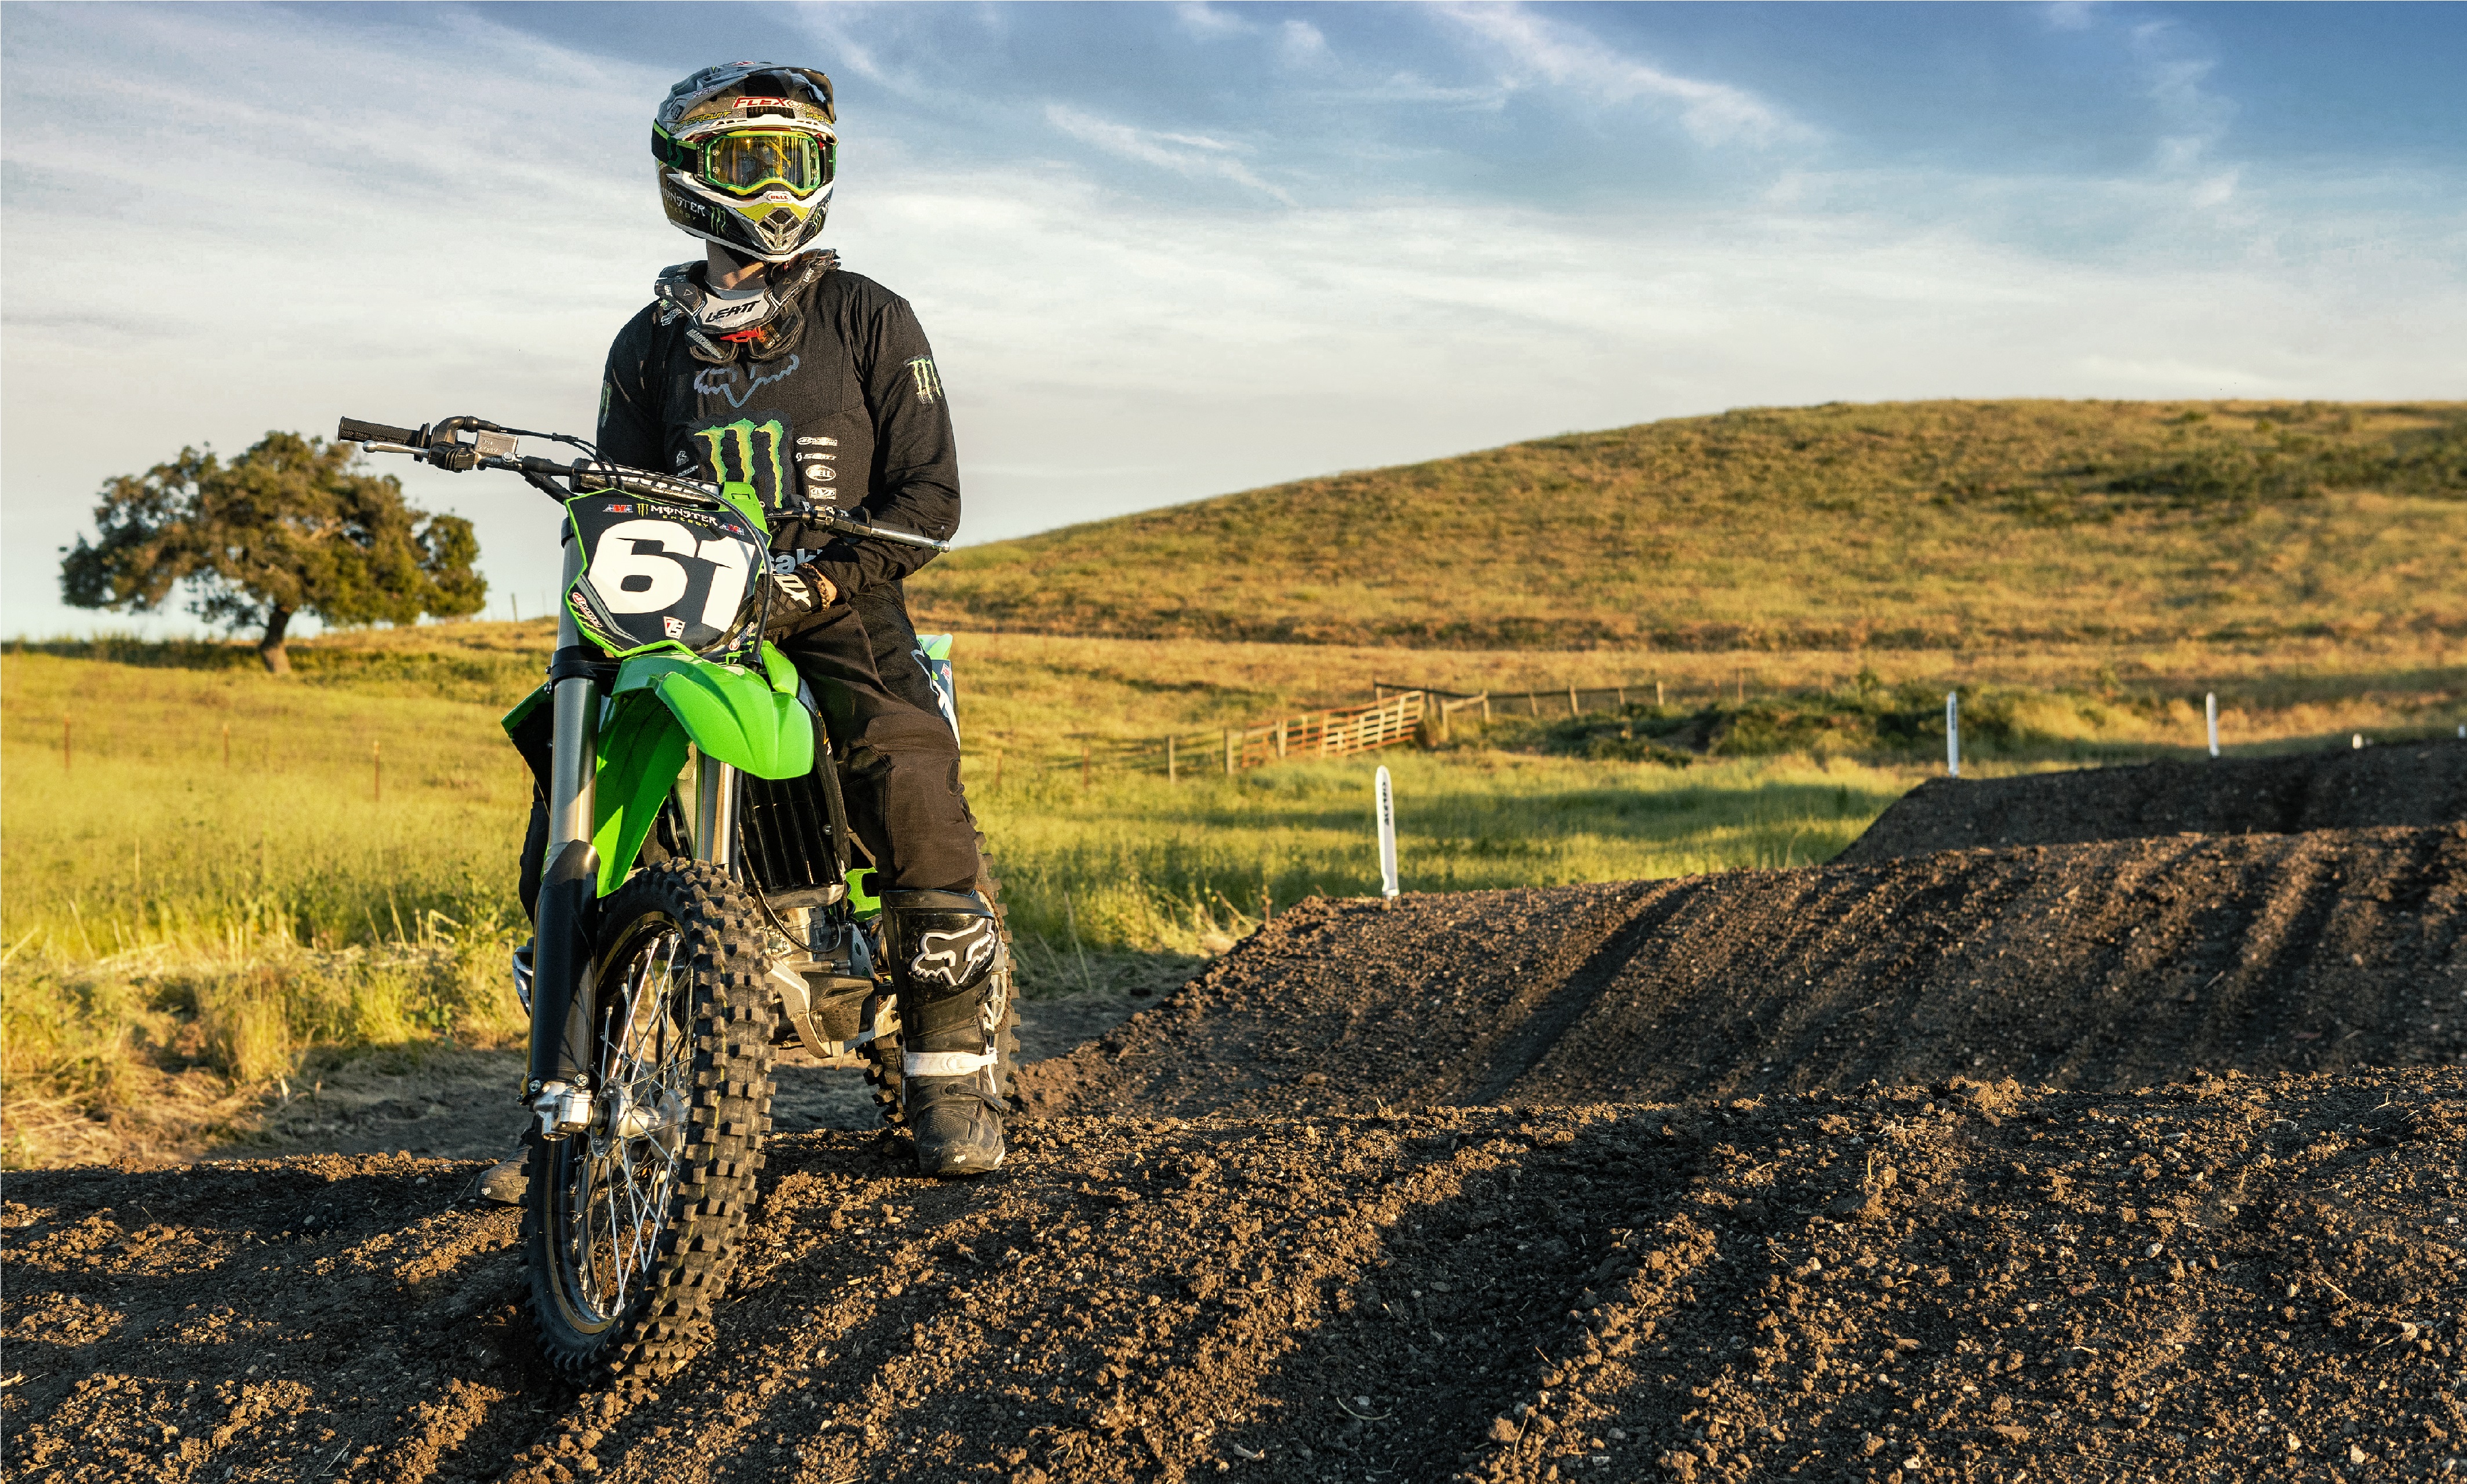 Dirt Bike vs Motorcycle: What Makes a Dirt Bike Different from a